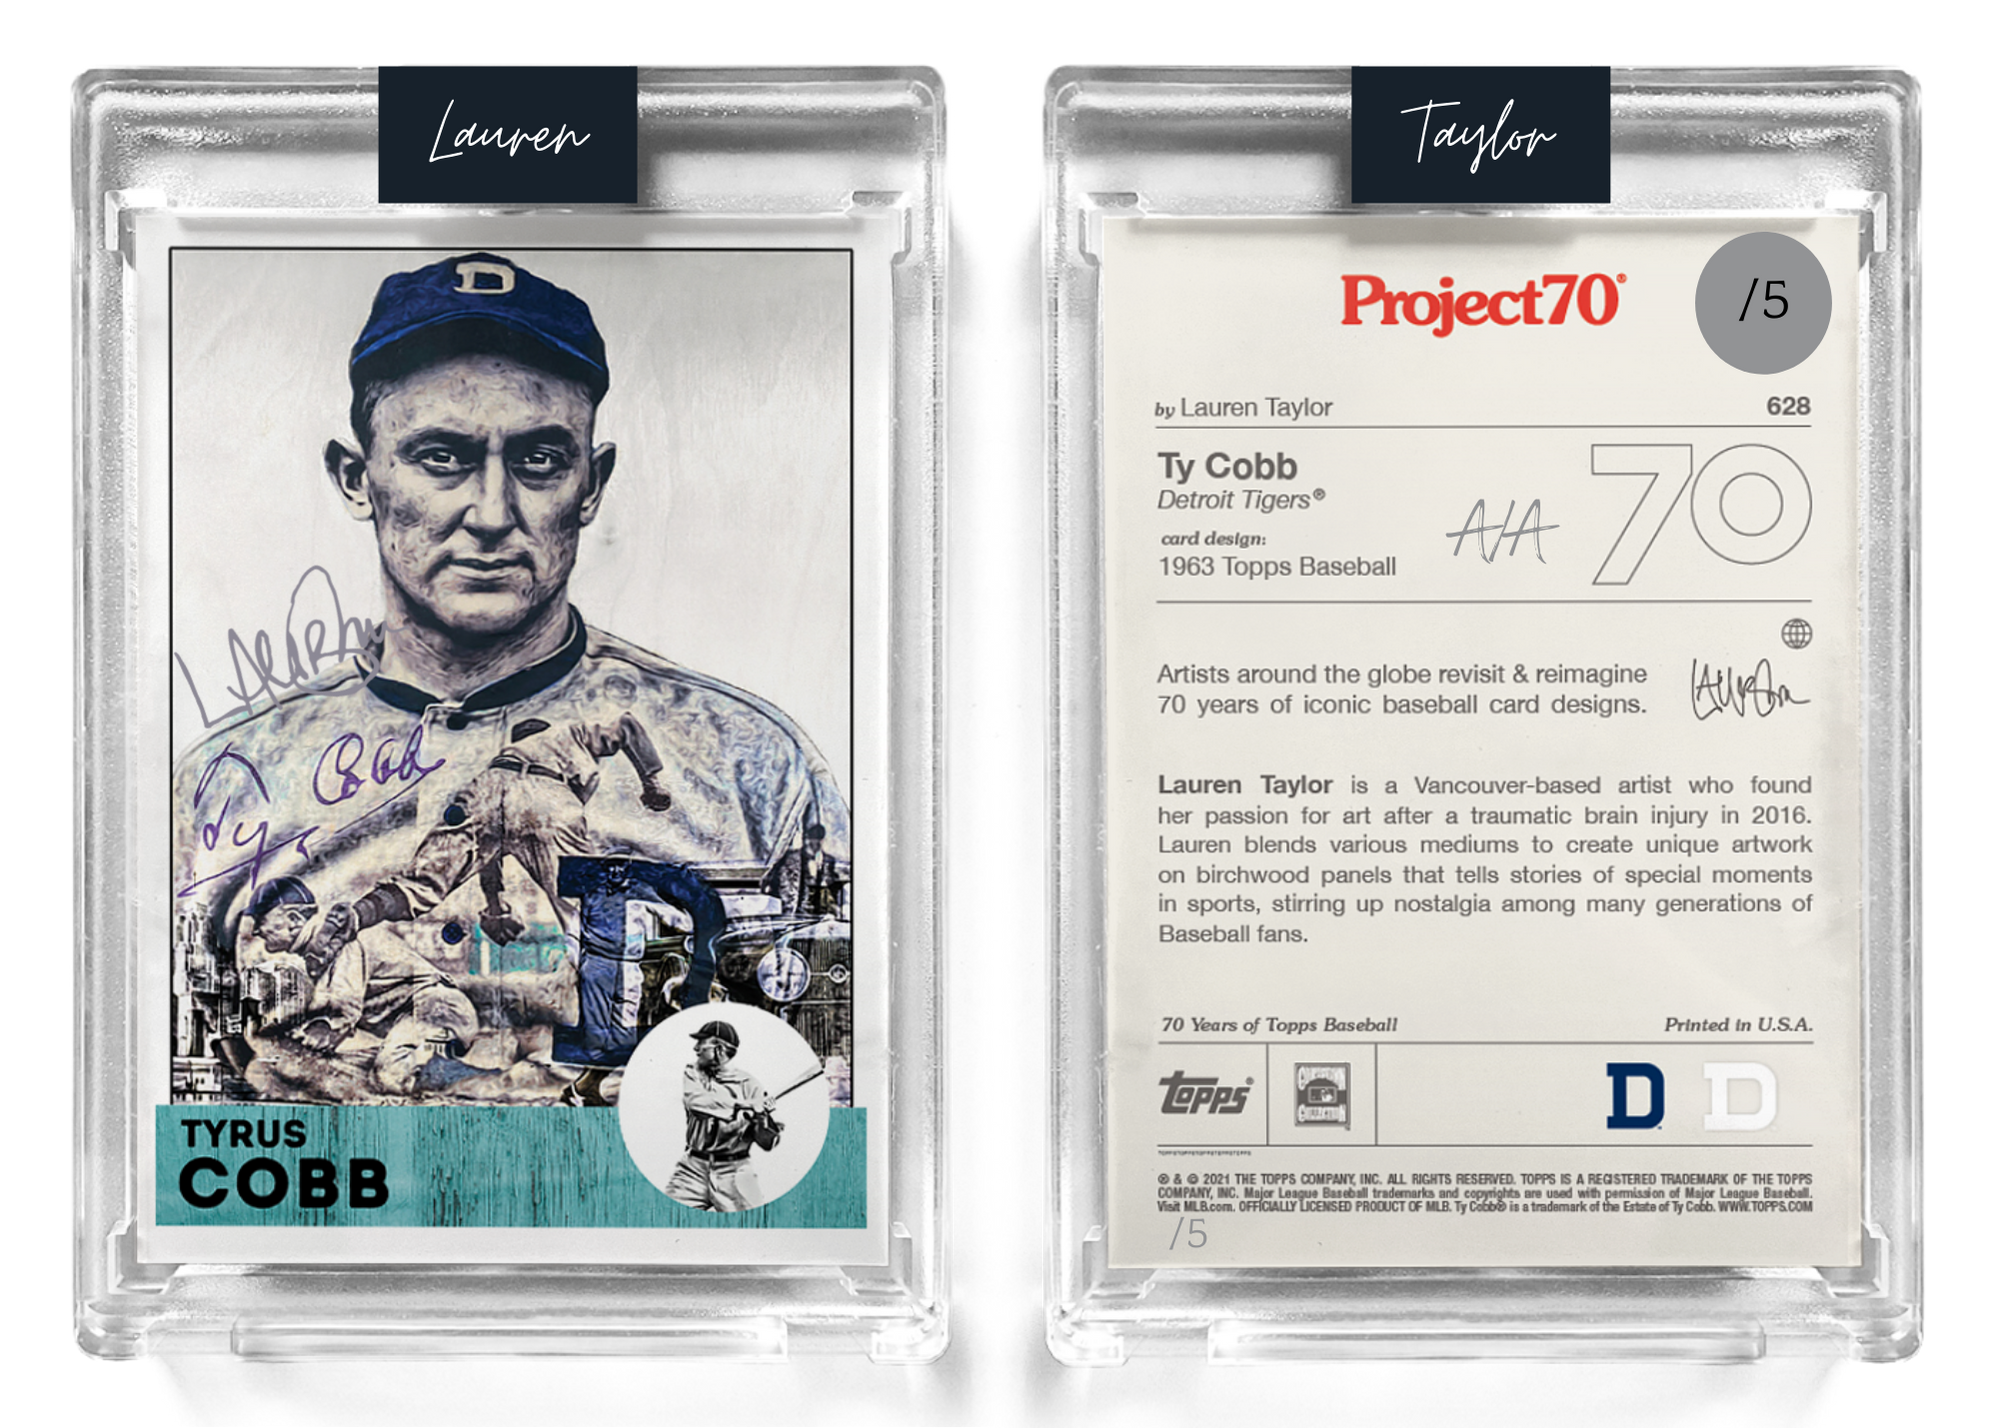 /5 Silver Metallic Artist Signature - Topps Project 70 130pt card #628 by Lauren Taylor - Tyrus Cobb